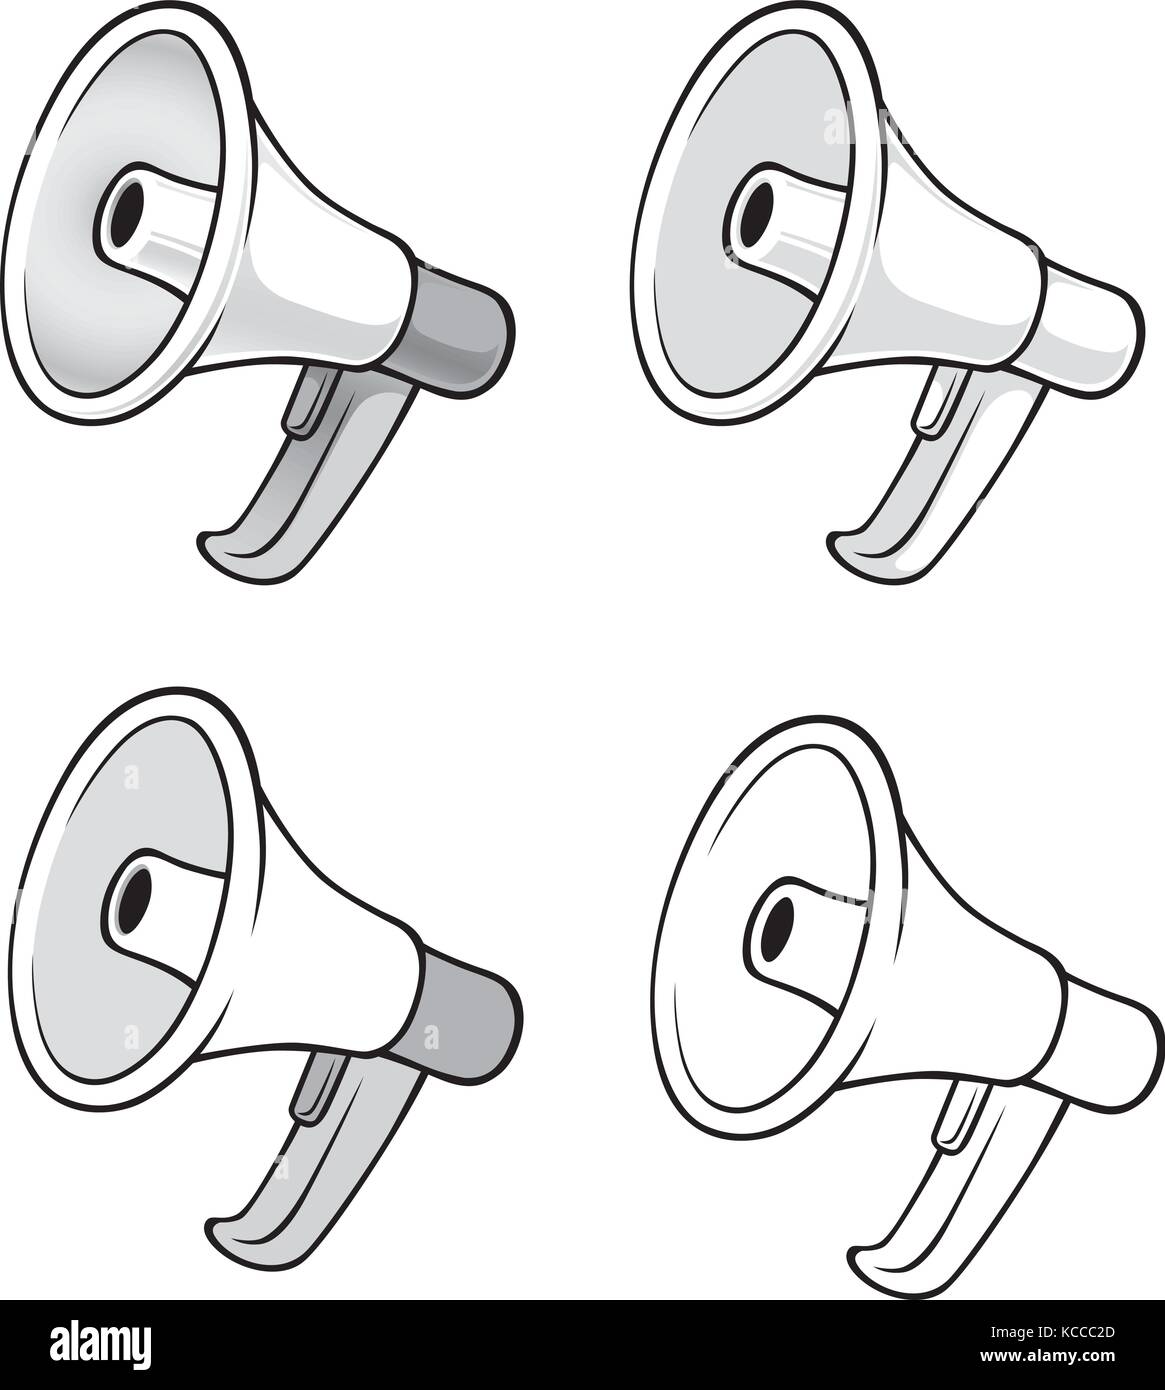 Vector illustration of a bullhorn. There are four versions of it ranging from the simplest black and white drawing to gray scale shaded drawing. Stock Vector